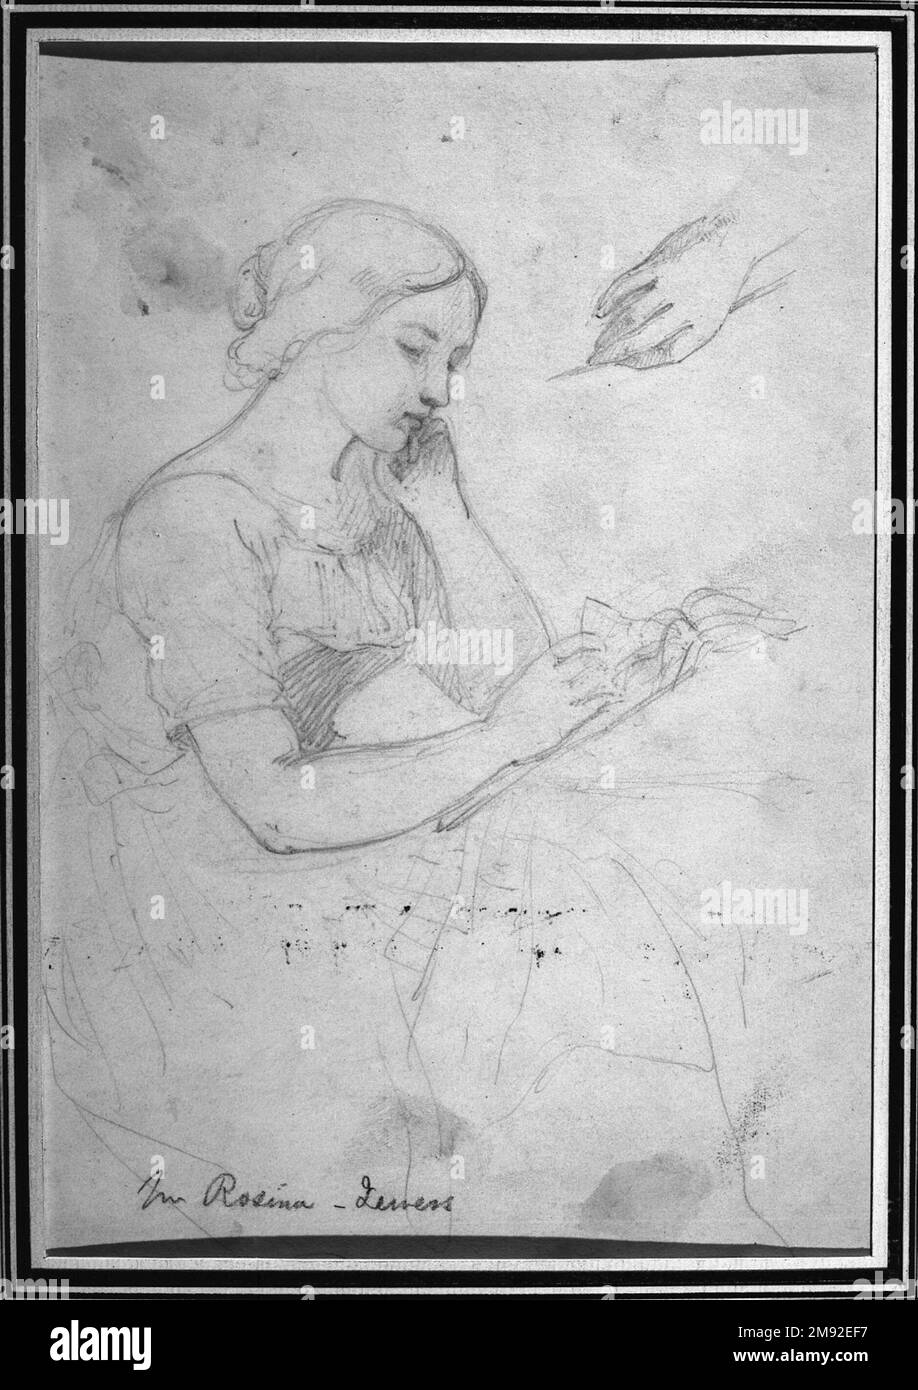 Woman Reading Daniel Huntington (American, 1816-1906). Woman Reading, ca. 1839-58. Graphite on wove paper, Sheet: 10 1/2 x 7 3/16 in. (26.7 x 18.3 cm).  In these two drawings, Daniel Huntington worked his way toward the final composition for his painting of an ideal figure subject titled The Sketcher: A Portrait of Mlle Rosina, a Jewess. Drawing directly from a model, he experimented with variations of the pose. The margins are filled with further studies for the placement of the hands. Pose and composition were Huntington’s primary concerns in his preparatory work. In the finished painting, h Stock Photo